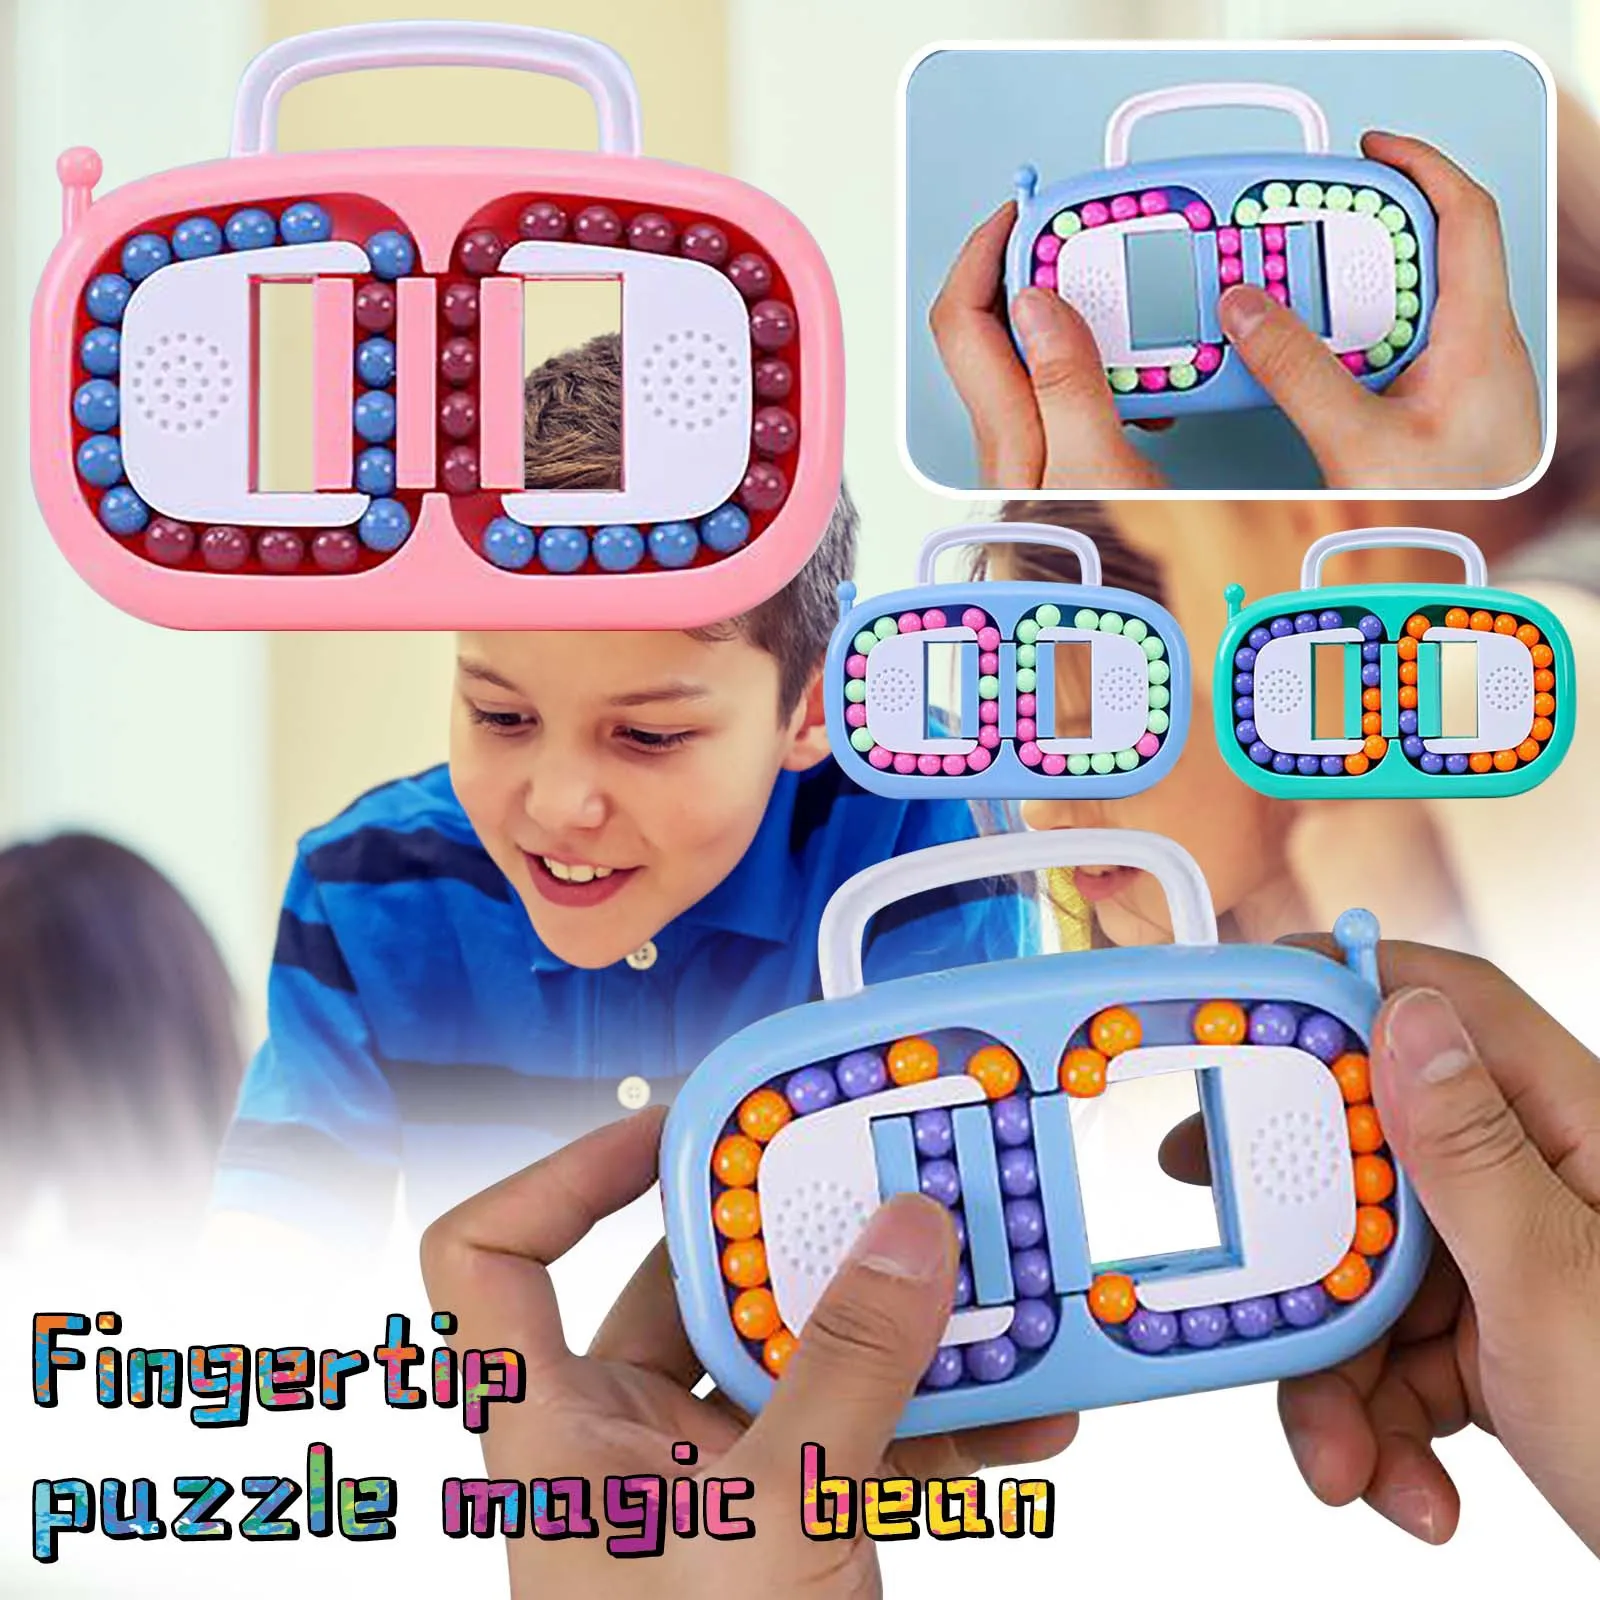 Rotating Magic Bean Fingertip Cube Fidget Toy for Adults Kids Stress Relief 